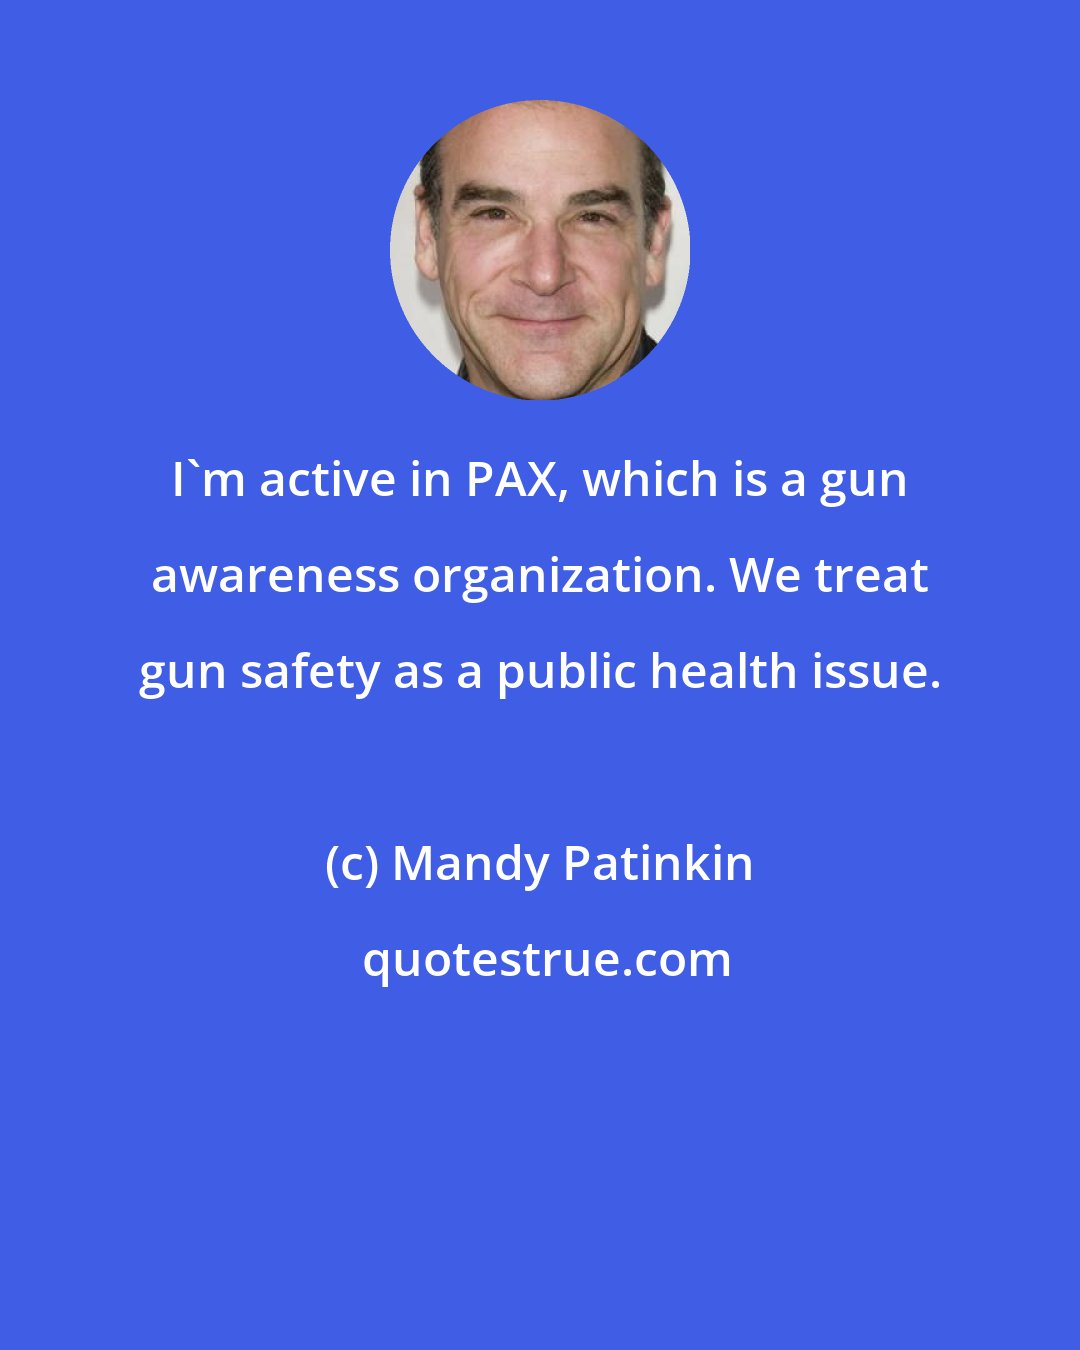 Mandy Patinkin: I'm active in PAX, which is a gun awareness organization. We treat gun safety as a public health issue.